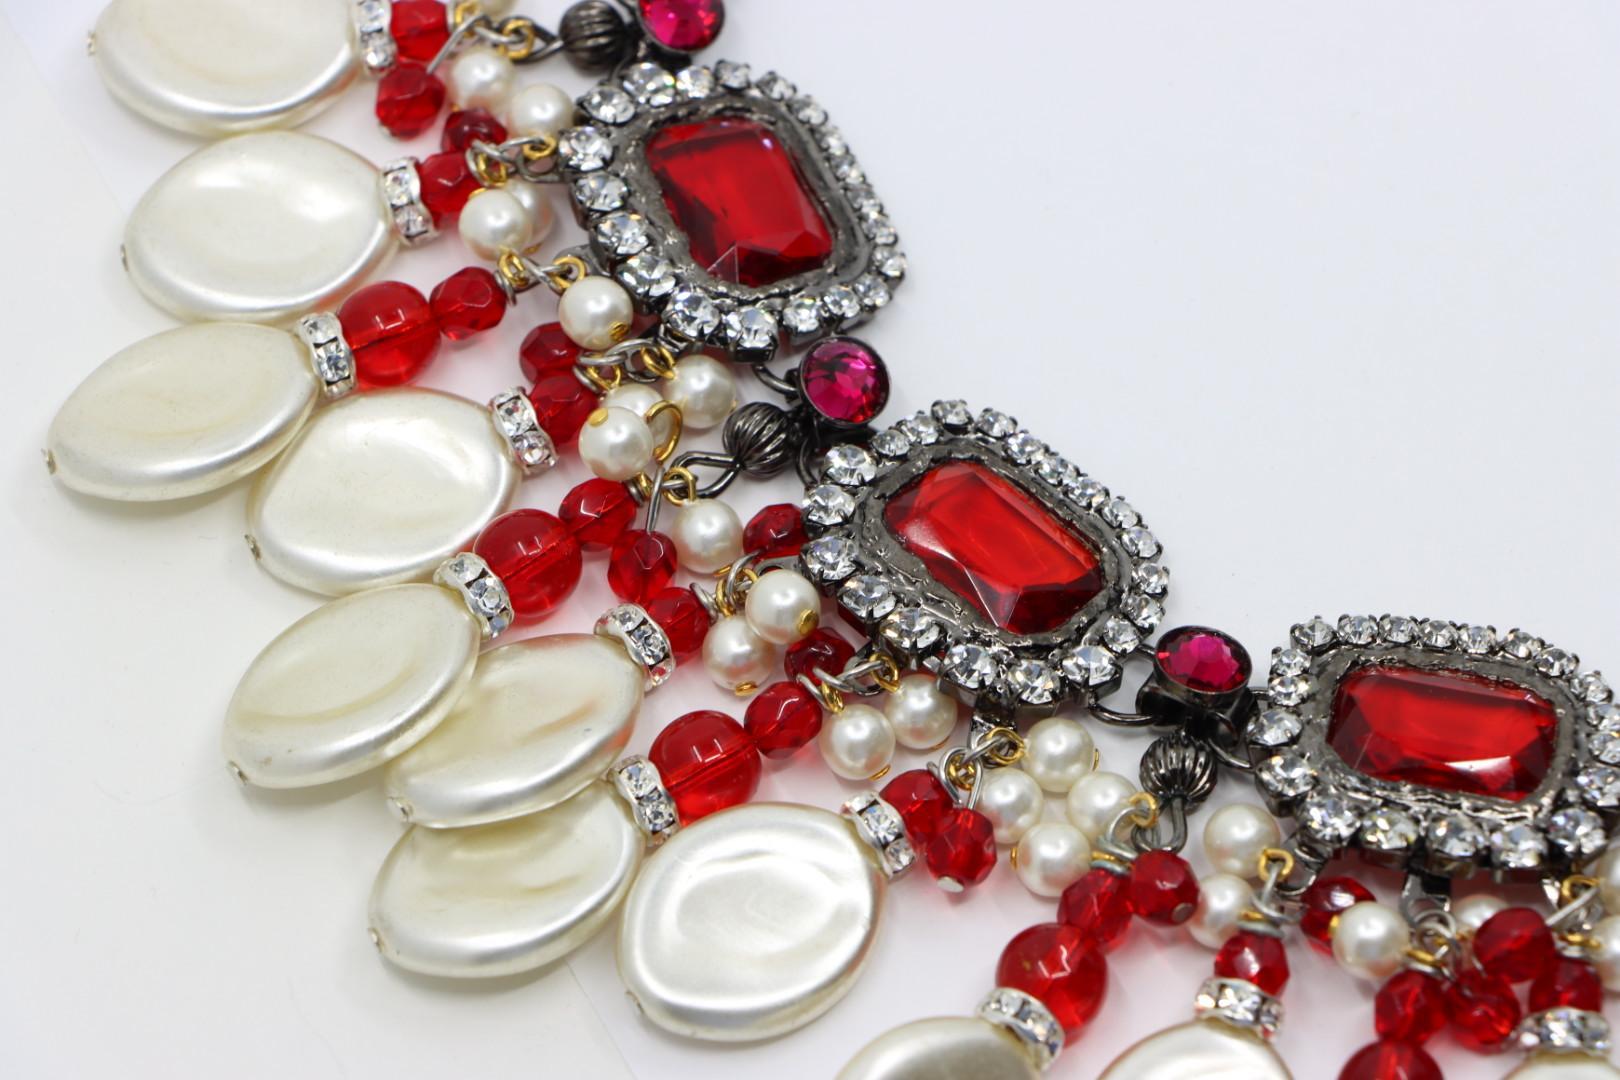 Rare Lawrence Vrba Red Rhinestone Faux Baroque Pearl Necklace & Earrings Parure For Sale 4